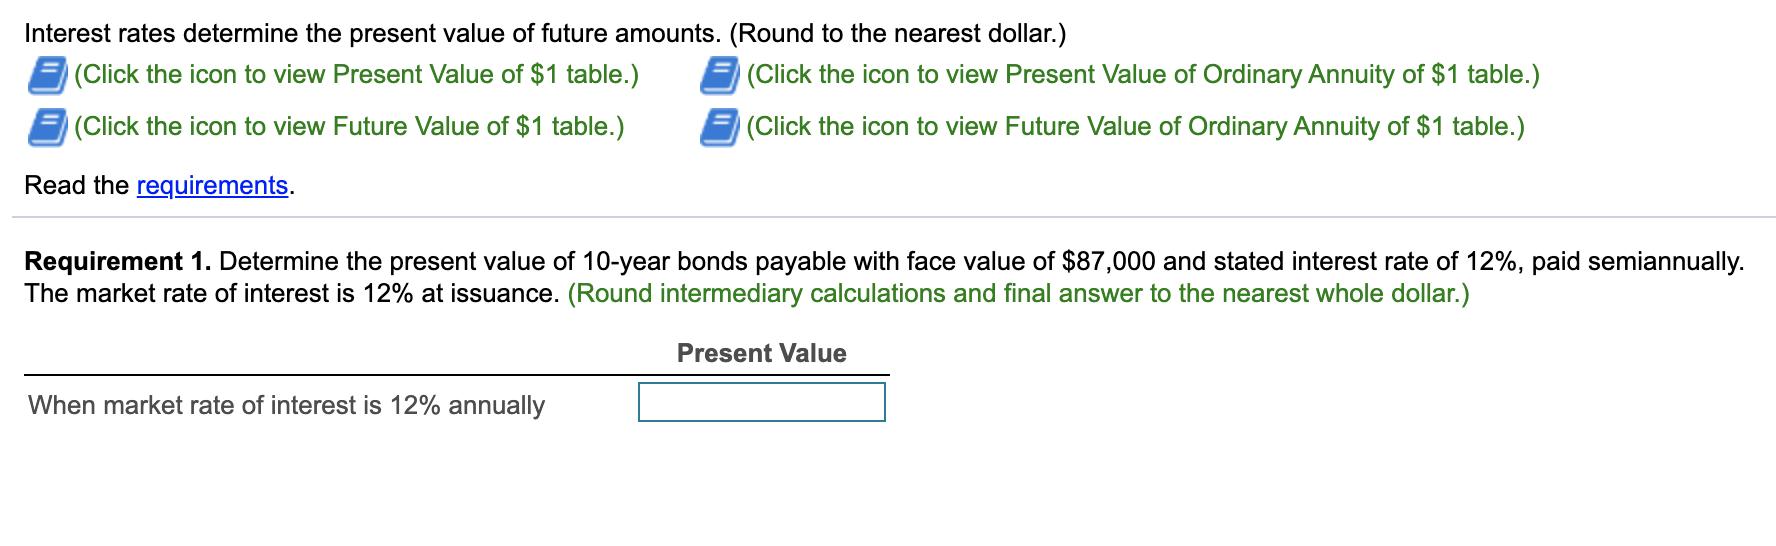 Interest rates determine the present value of future amounts. (Round to the nearest dollar.) (Click the icon to view Present